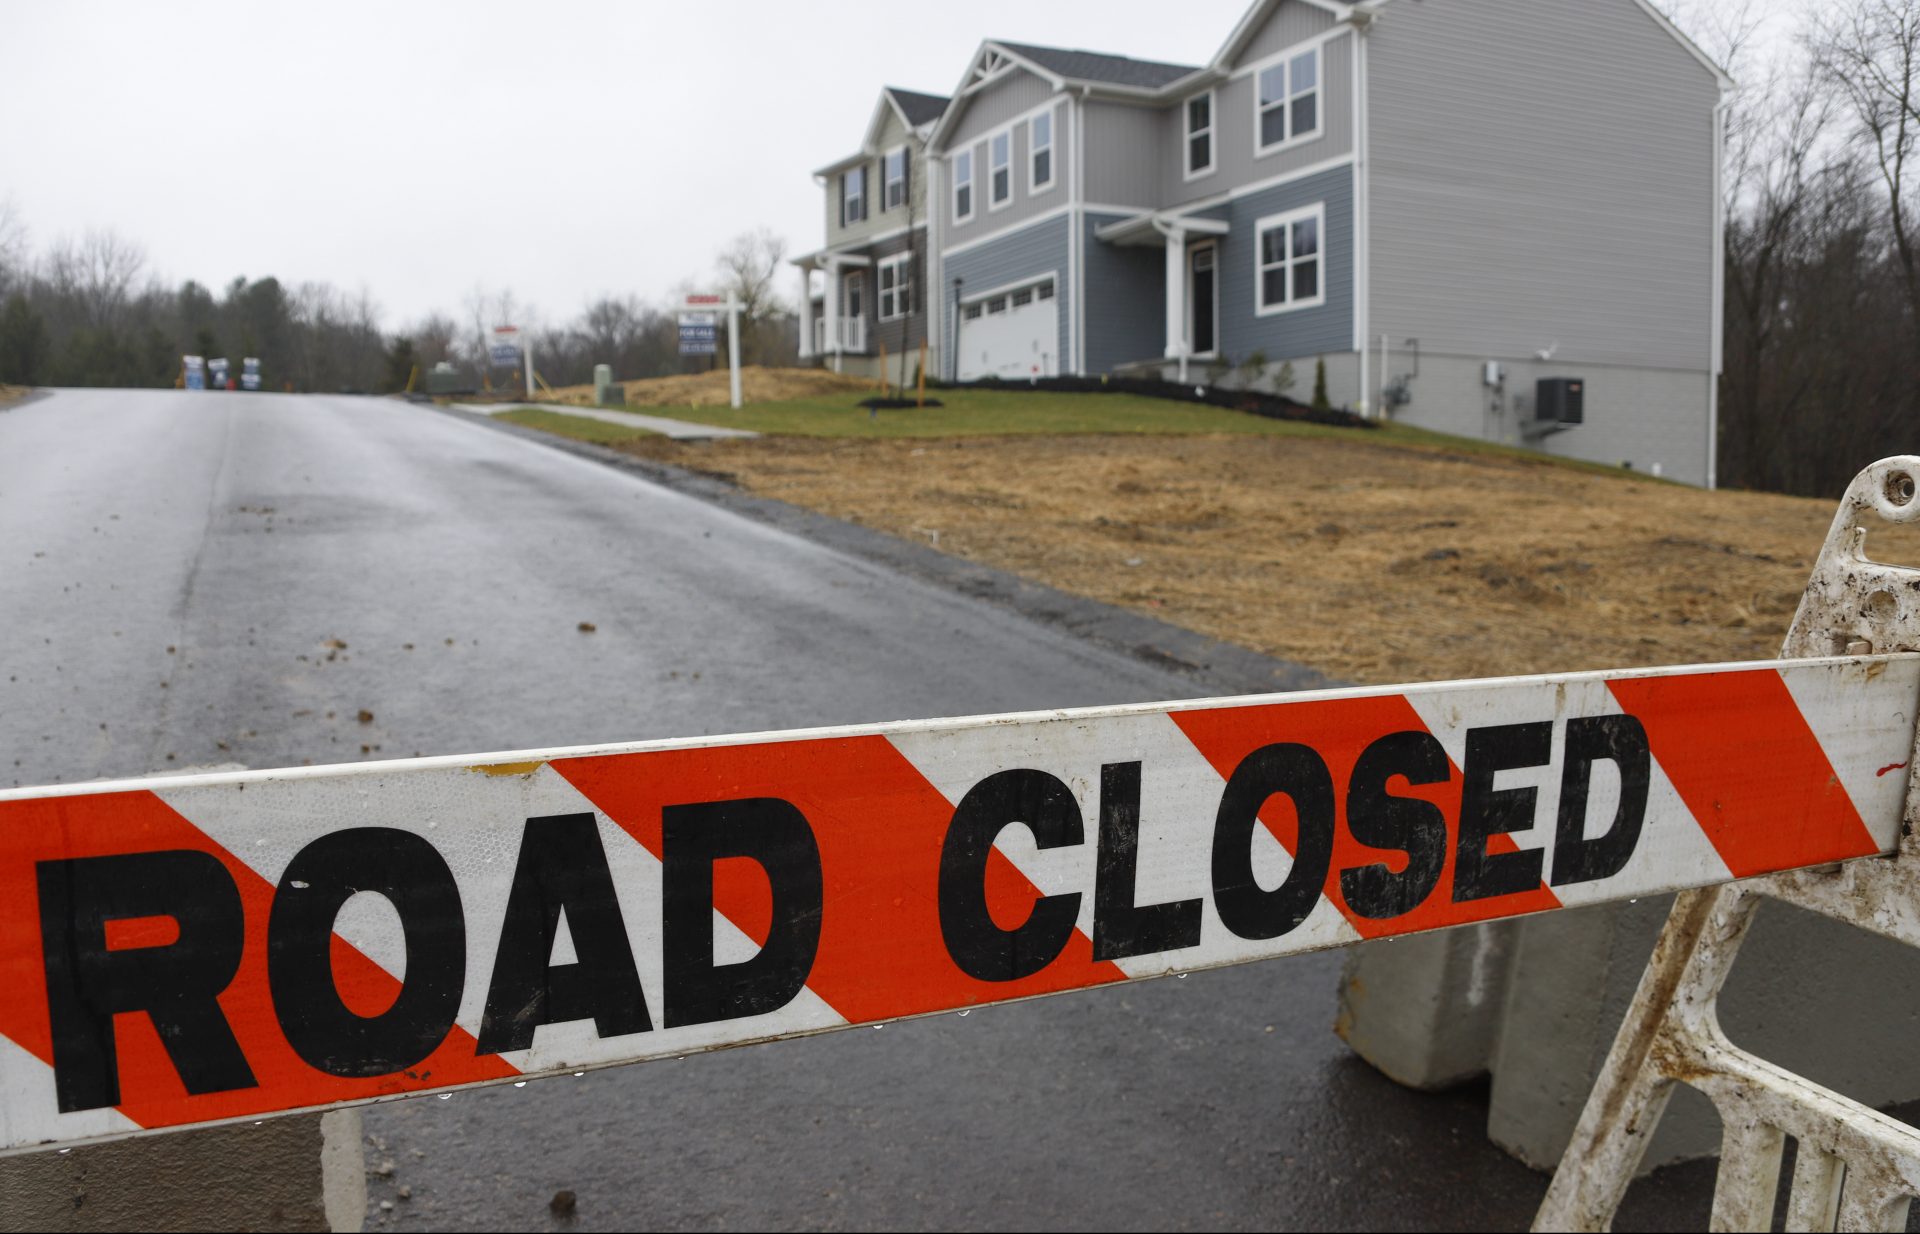 A barricade blocks the road to a new home construction site in Zelienople, Pa., as enforcement of Pennsylvania Gov. Tom Wolf's order to close non-essential businesses, including building and highway construction, was set to begin Monday, March 23, 2020 in efforts to slow the spread of the Coronavirus.